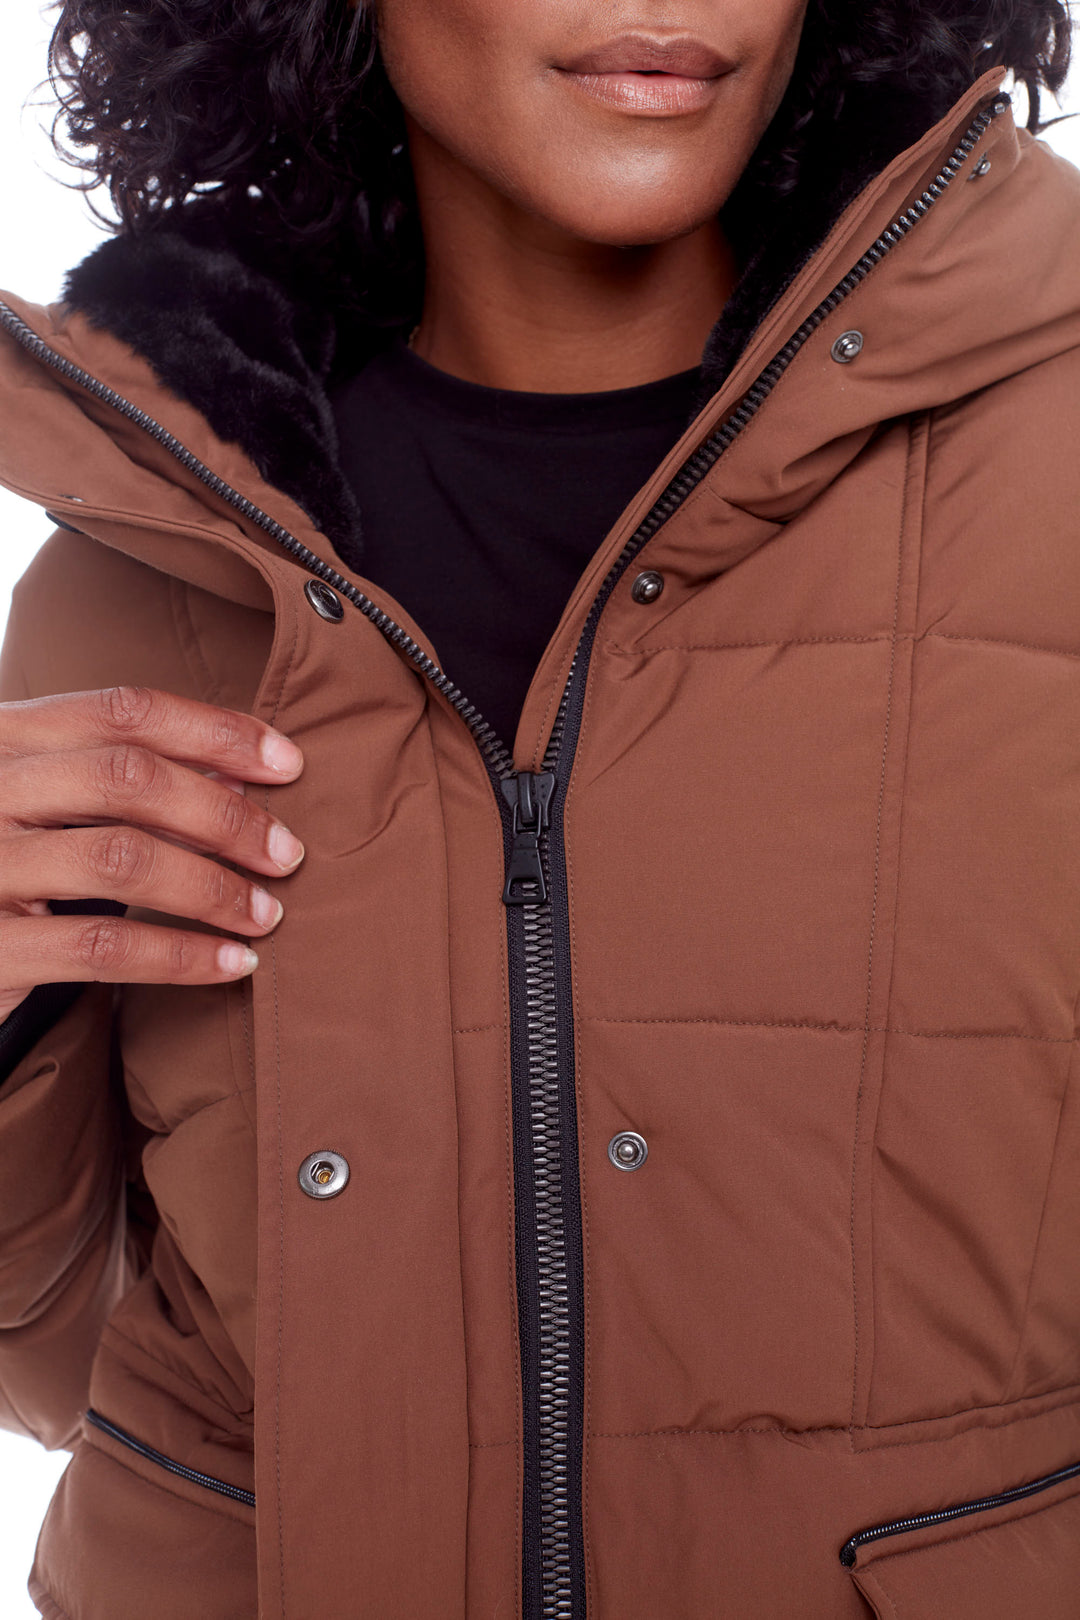 KOOTNEY | WOMEN'S VEGAN DOWN (RECYCLED) MID-LENGTH PARKA, MAPLE